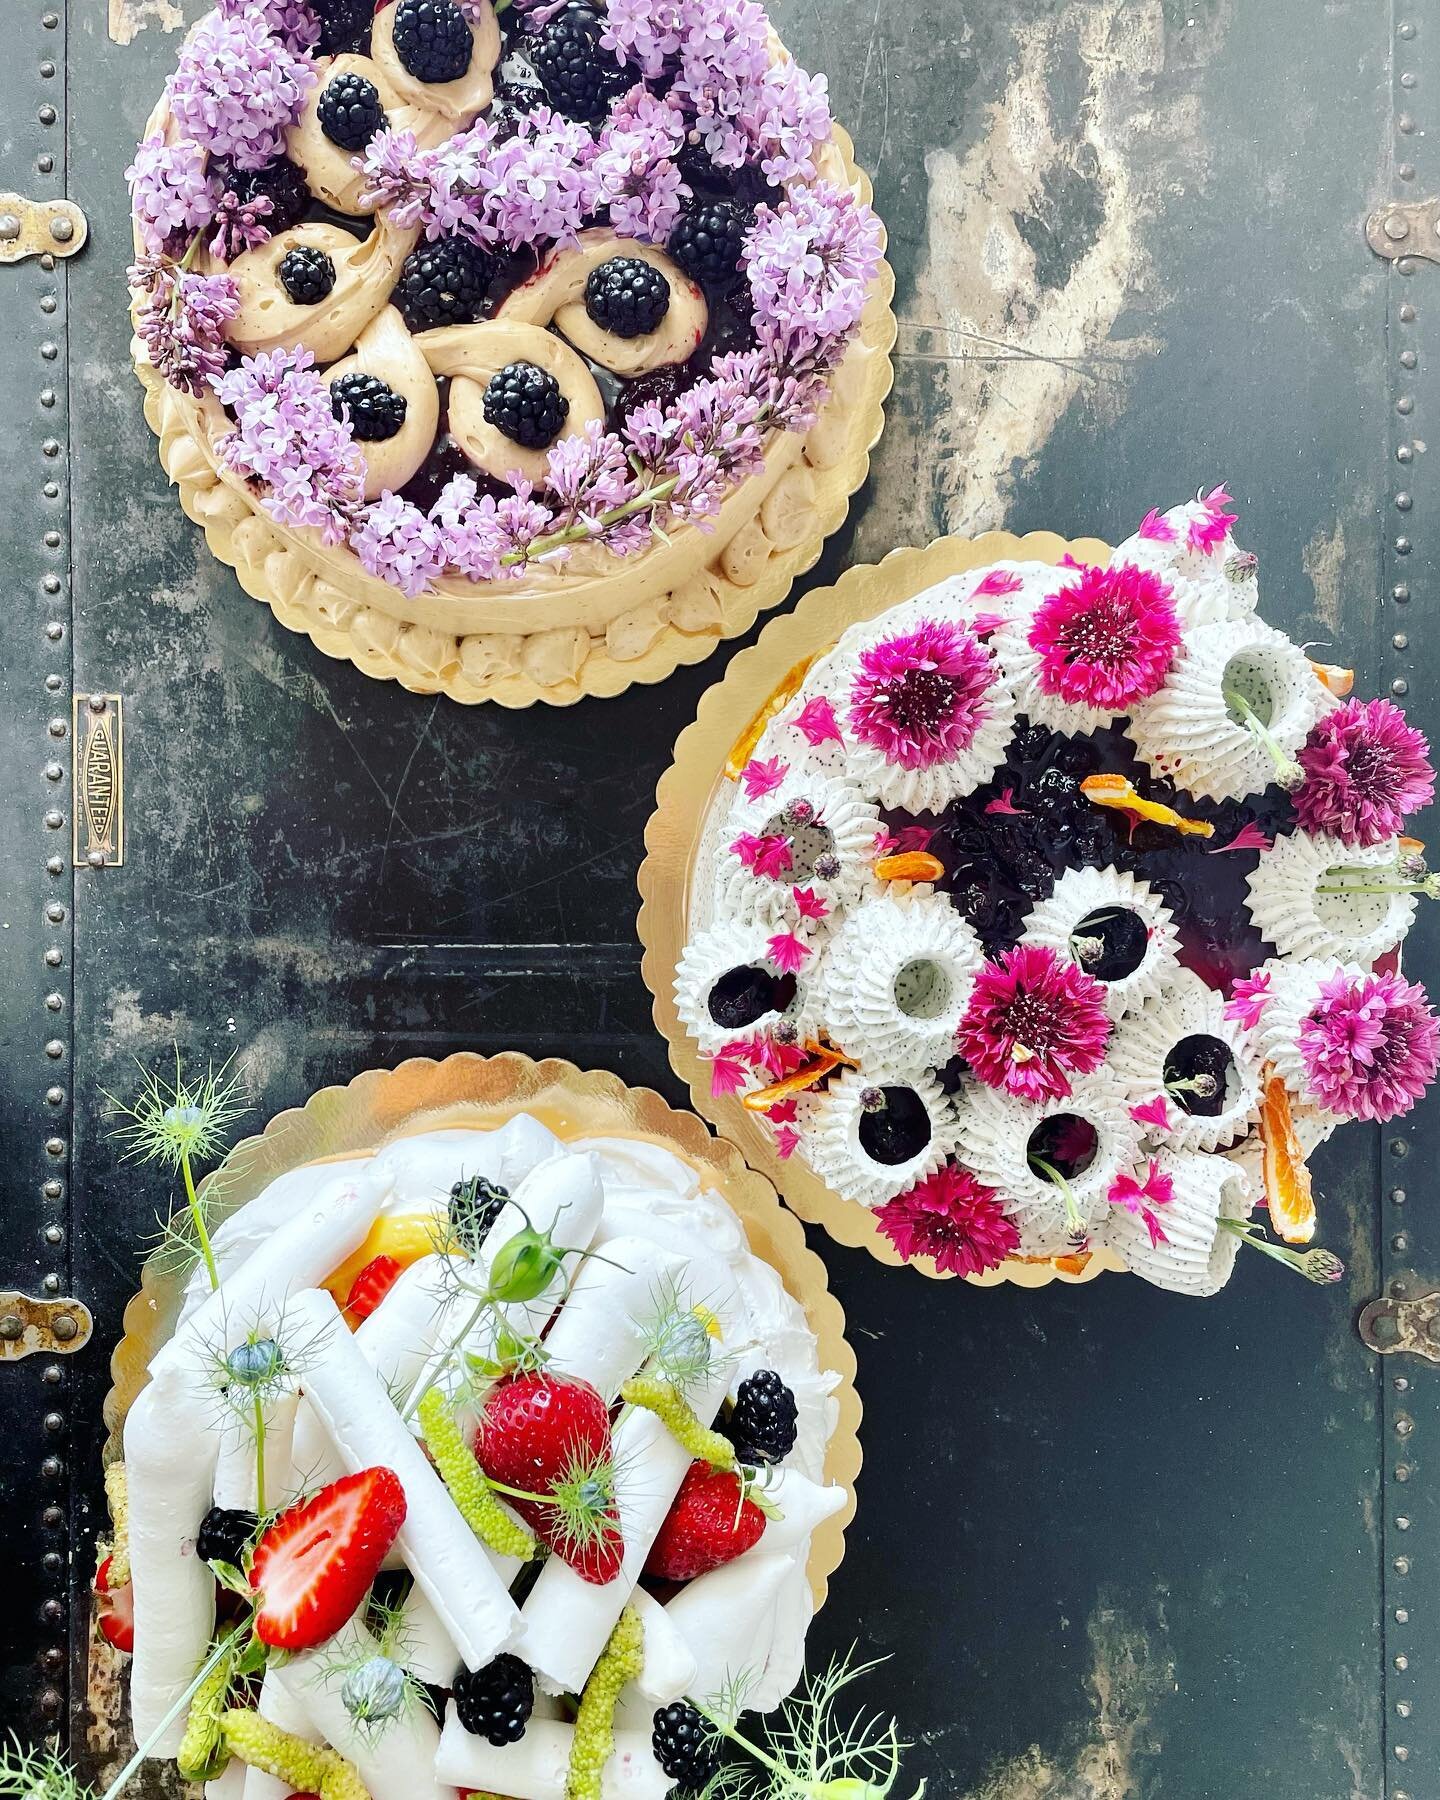 Line up of whole grain cakes and pavlova for a baby shower! Featuring summer berries - blackberry, Blueberry, strawberry and mulberry. We love a dessert spread featuring multiple cakes. Everyone gets what they most want and the whimsy is at an all ti